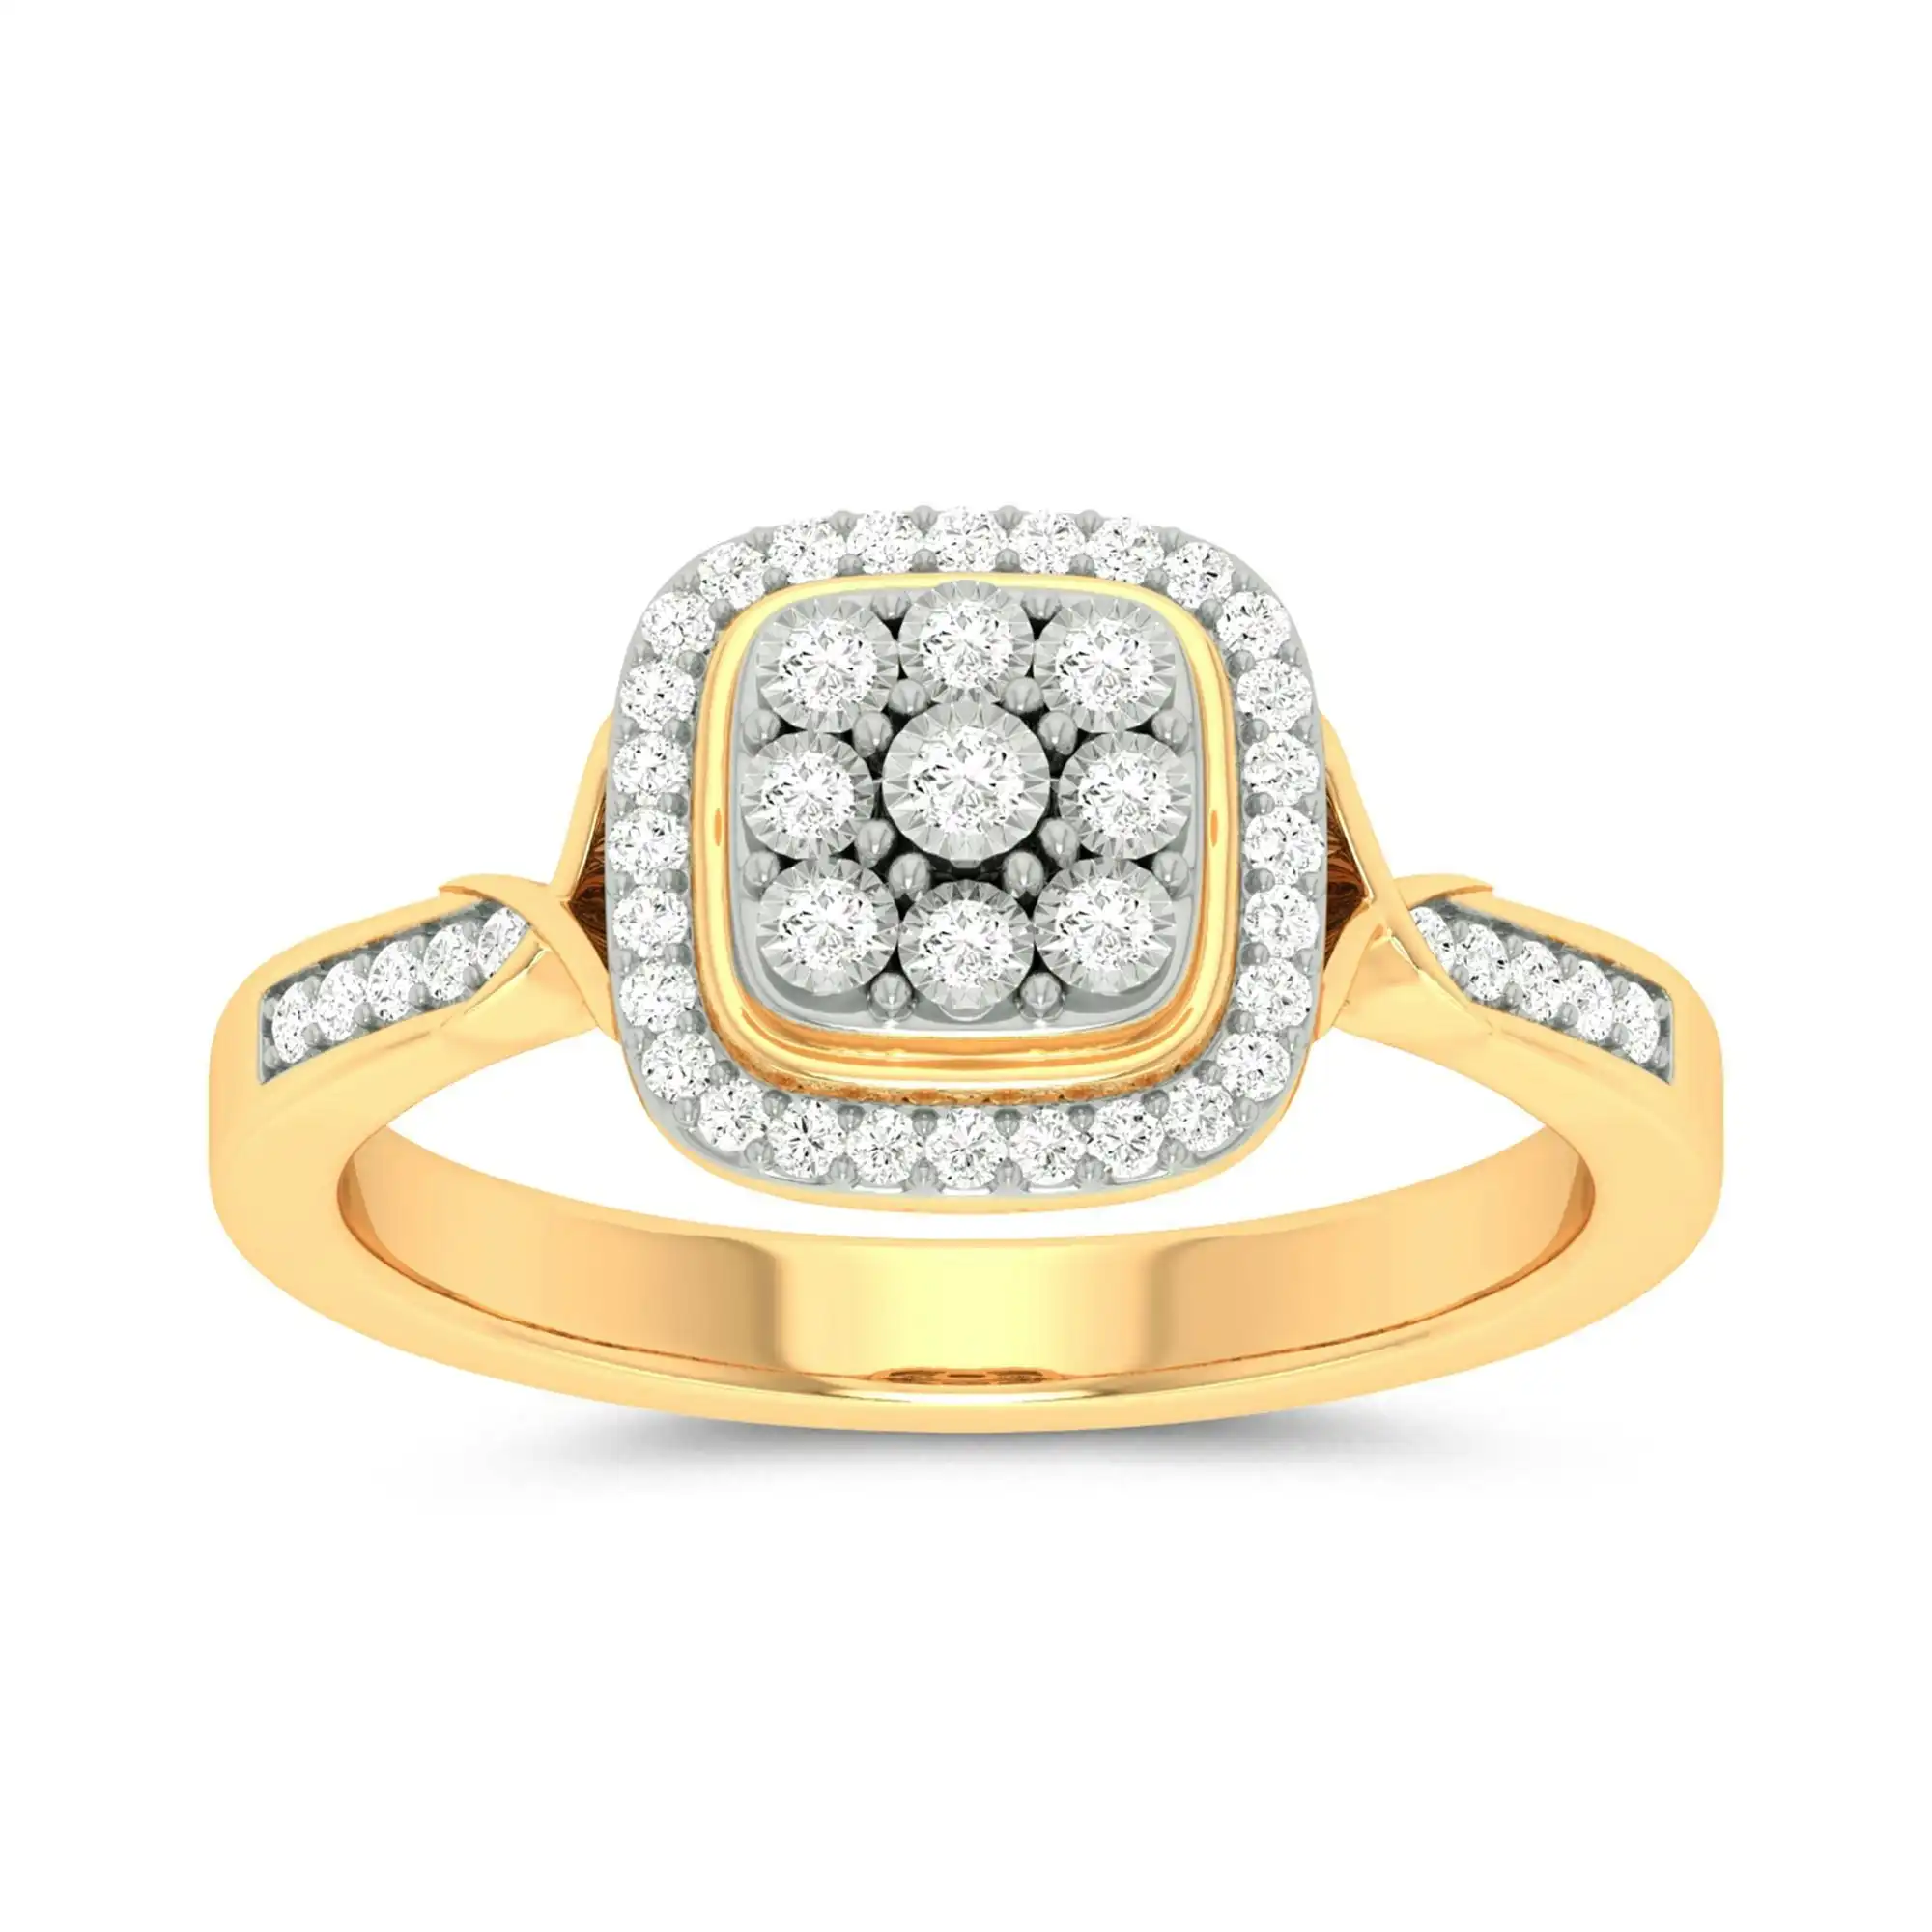 Meera Miracle Bezel Ring with 1/5ct of Laboratory Grown Diamonds in 9ct Yellow Gold